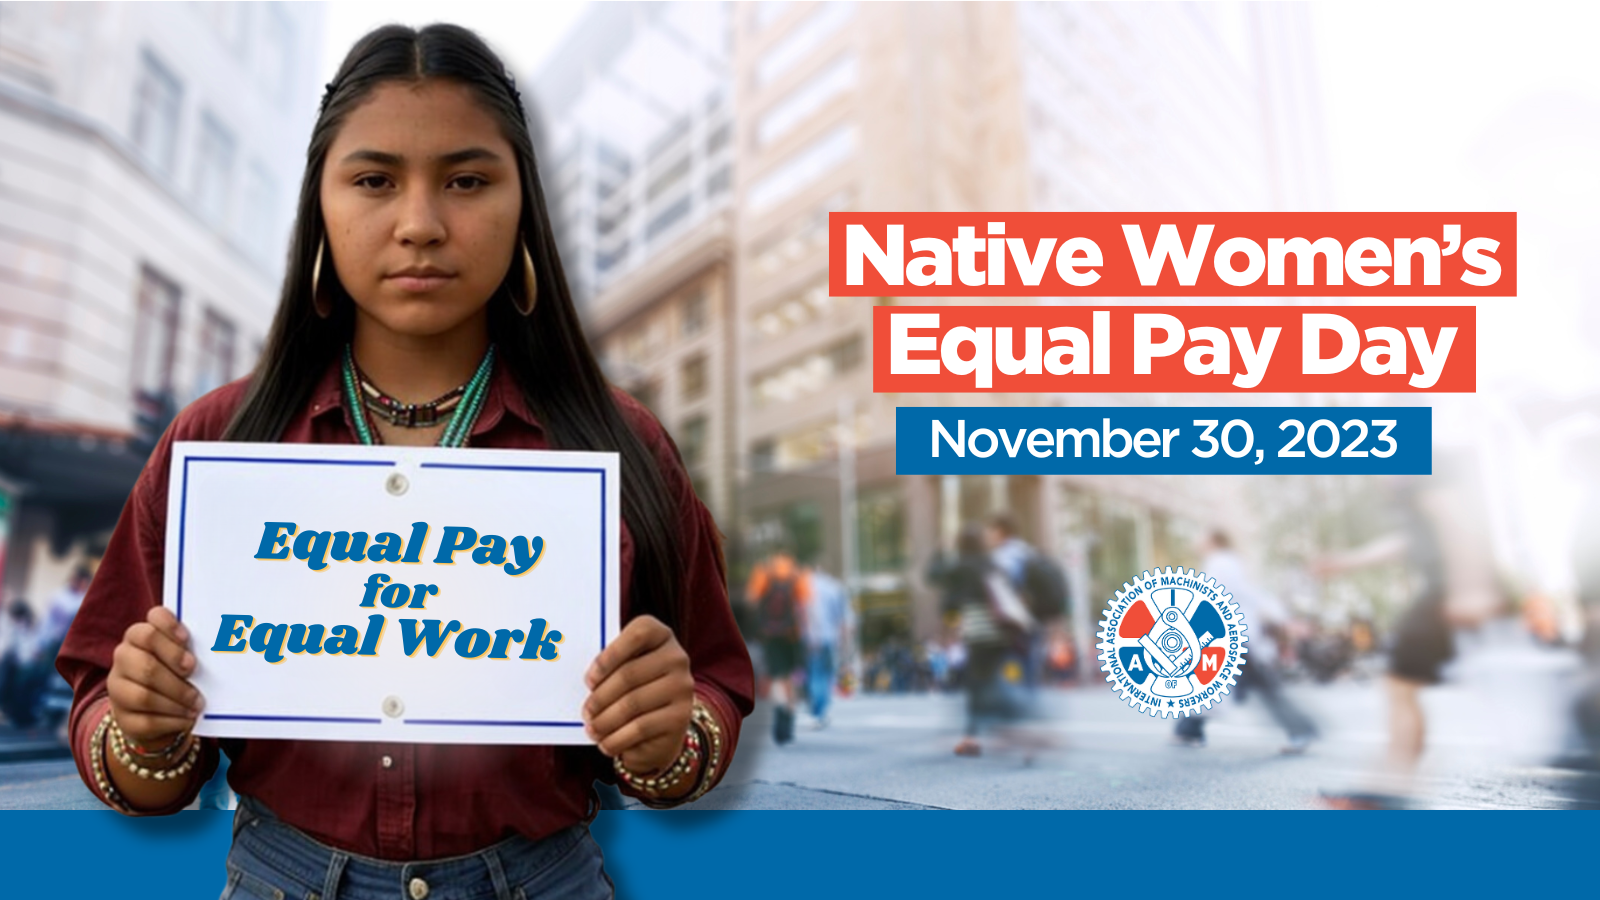 Today is Native Women’s Equal Pay Day